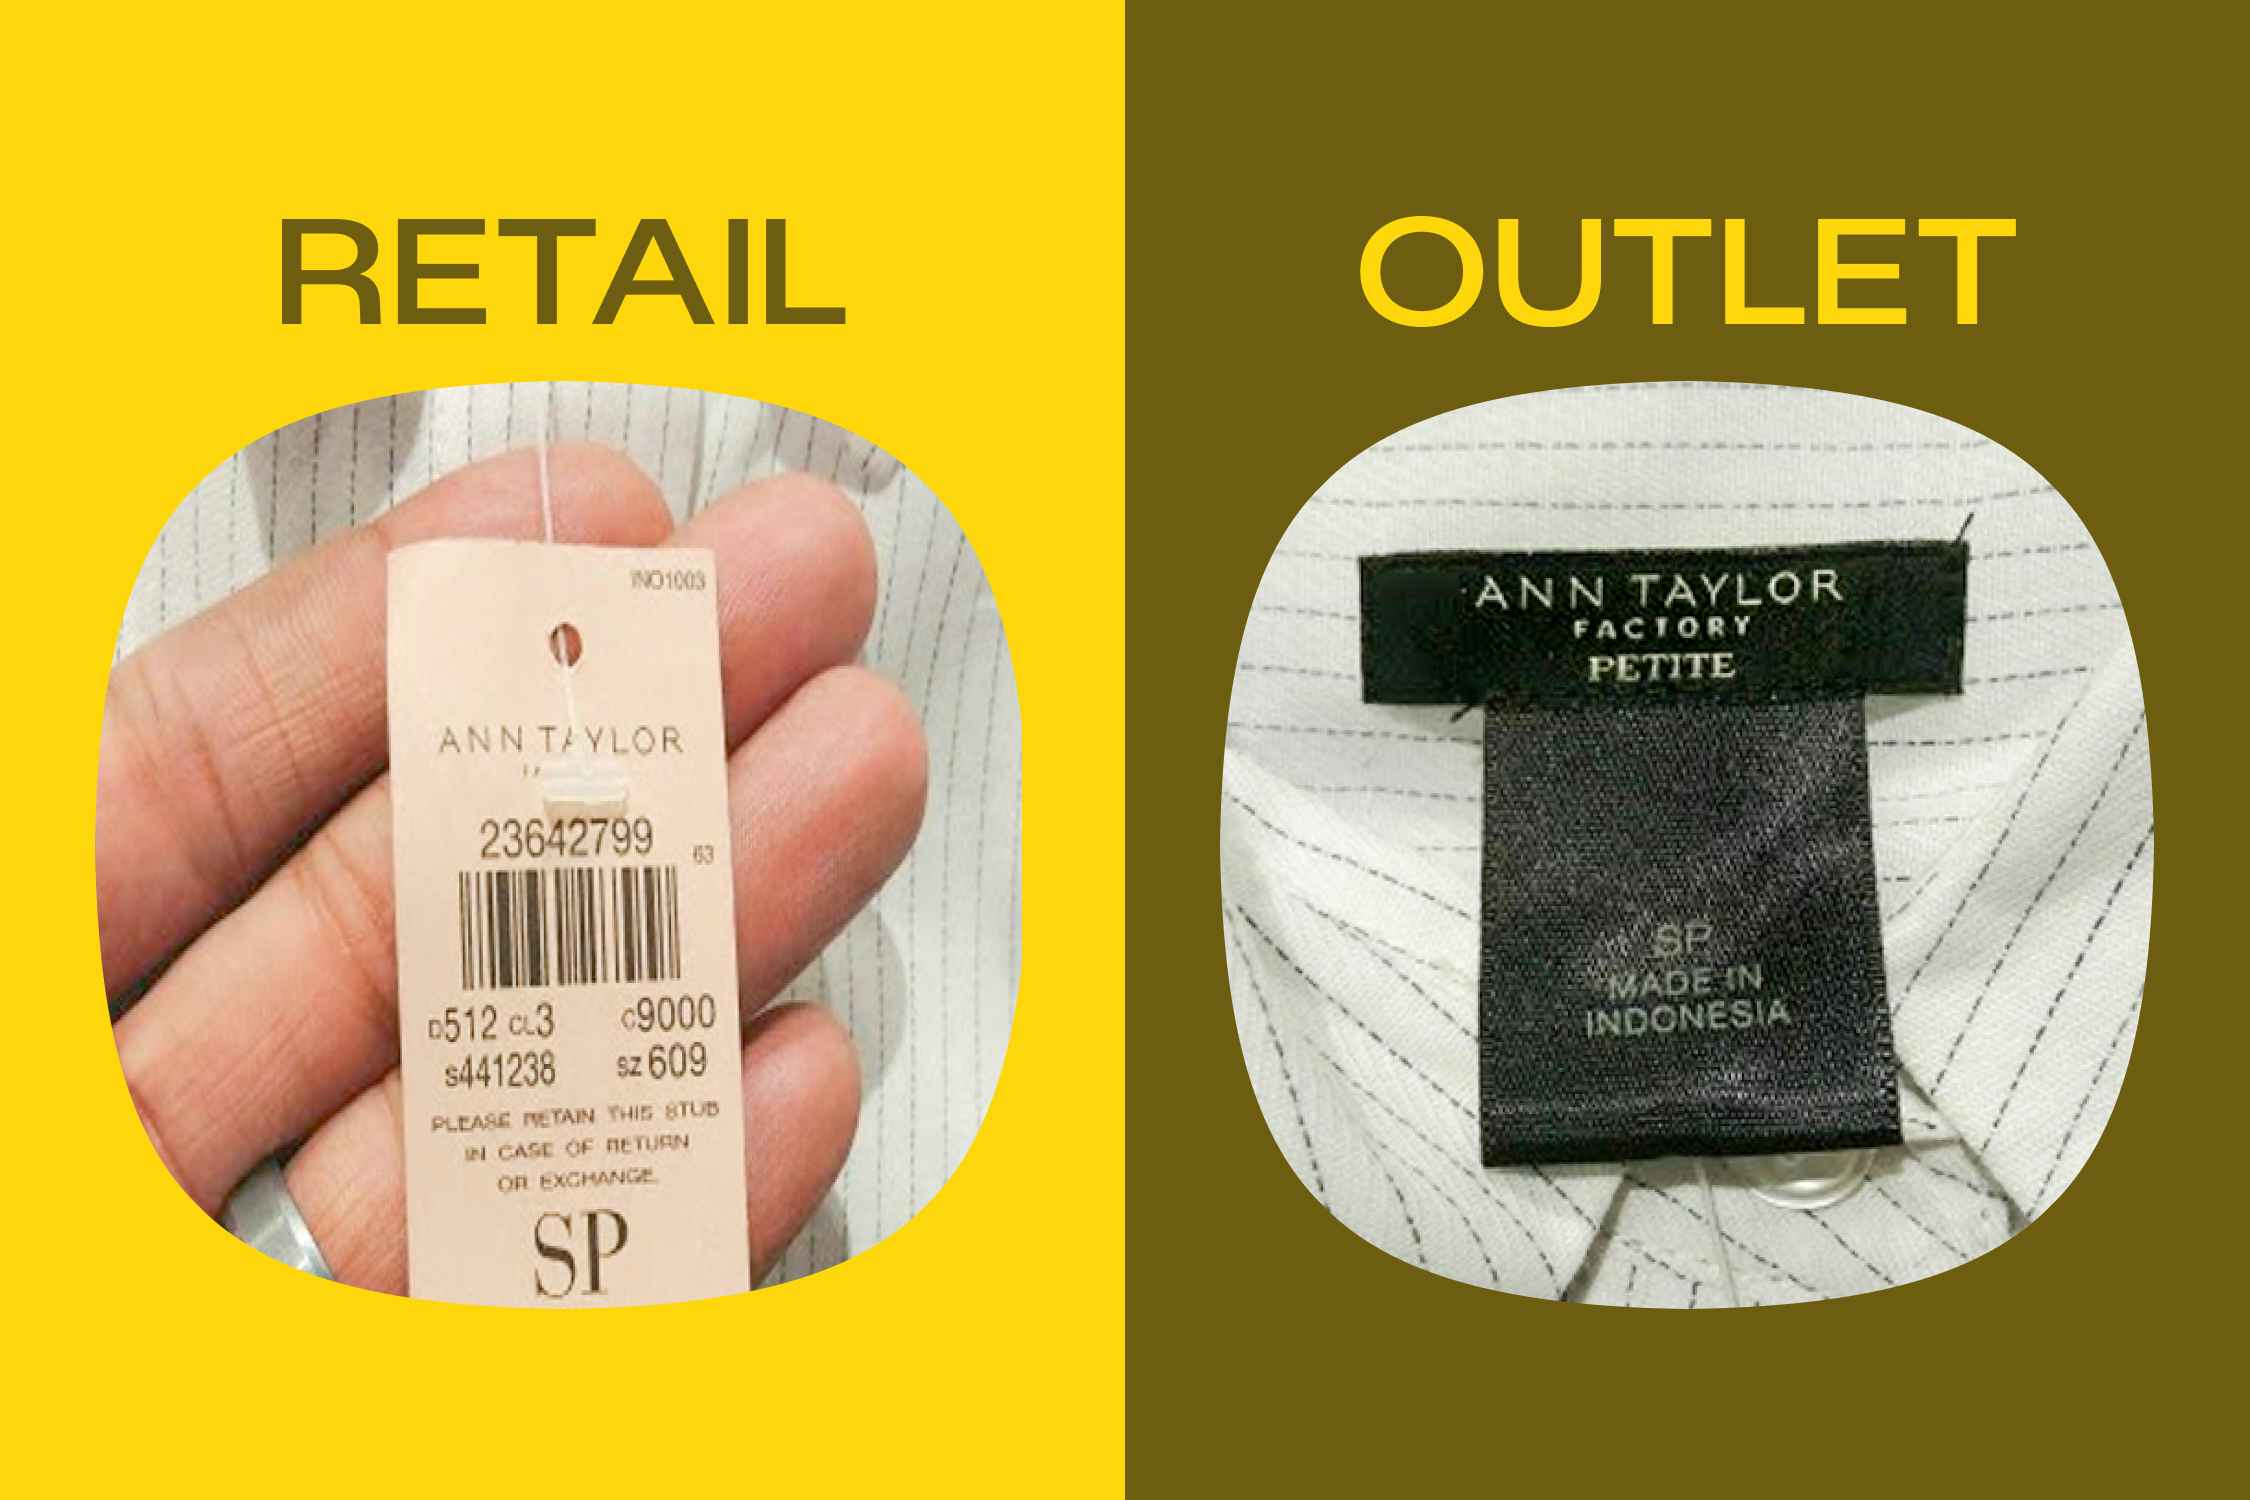 an example of a retail and outlet version of Ann Taylor items